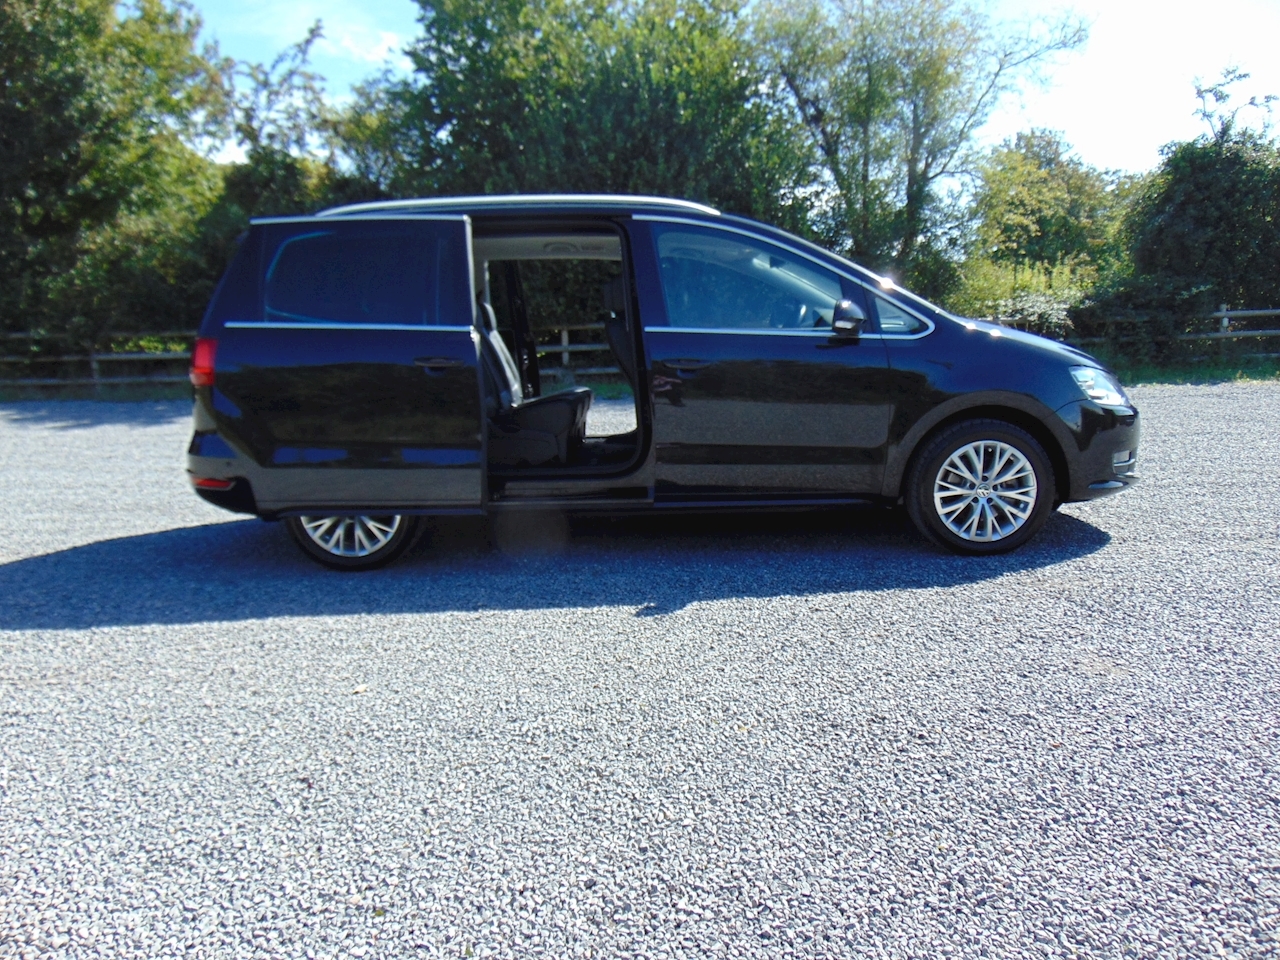 VW Sharan can be an office on wheels